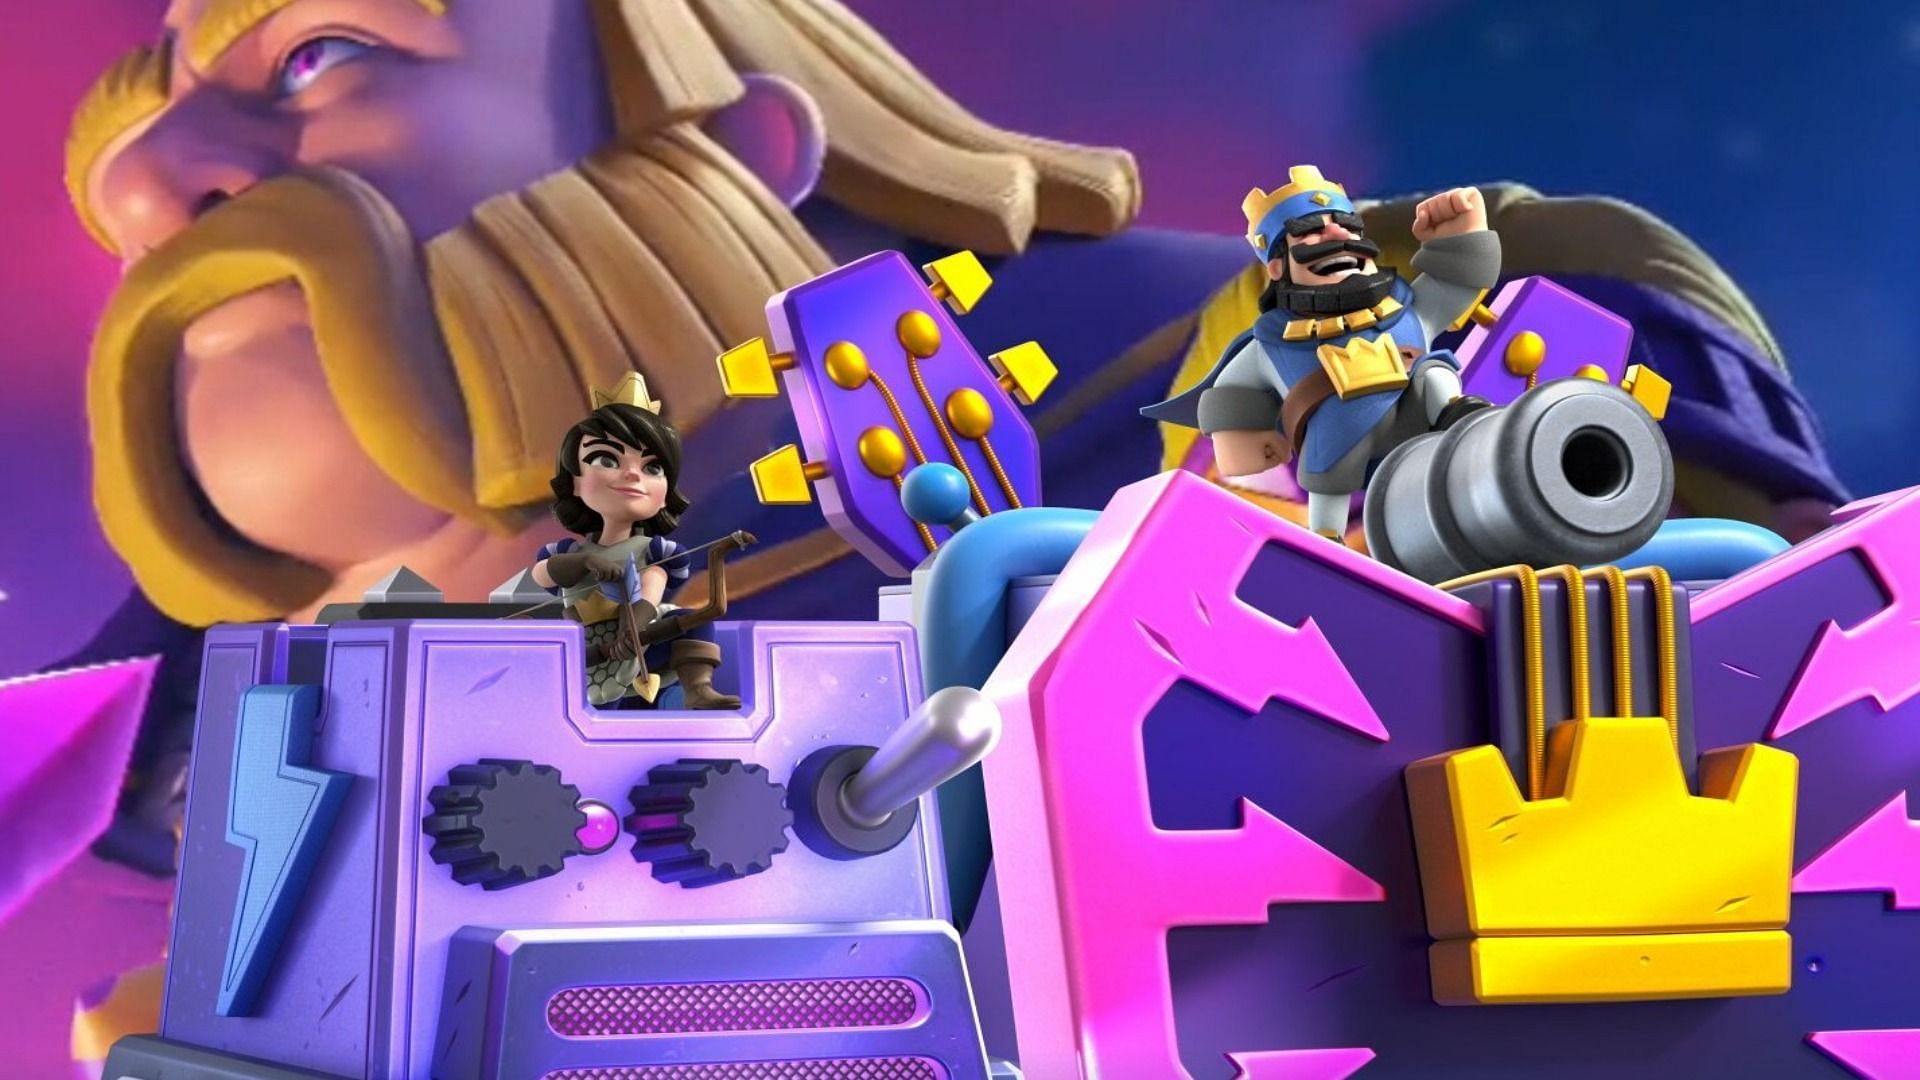 New tower skins are available in the game (Image via Supercell/RoyalAPI)